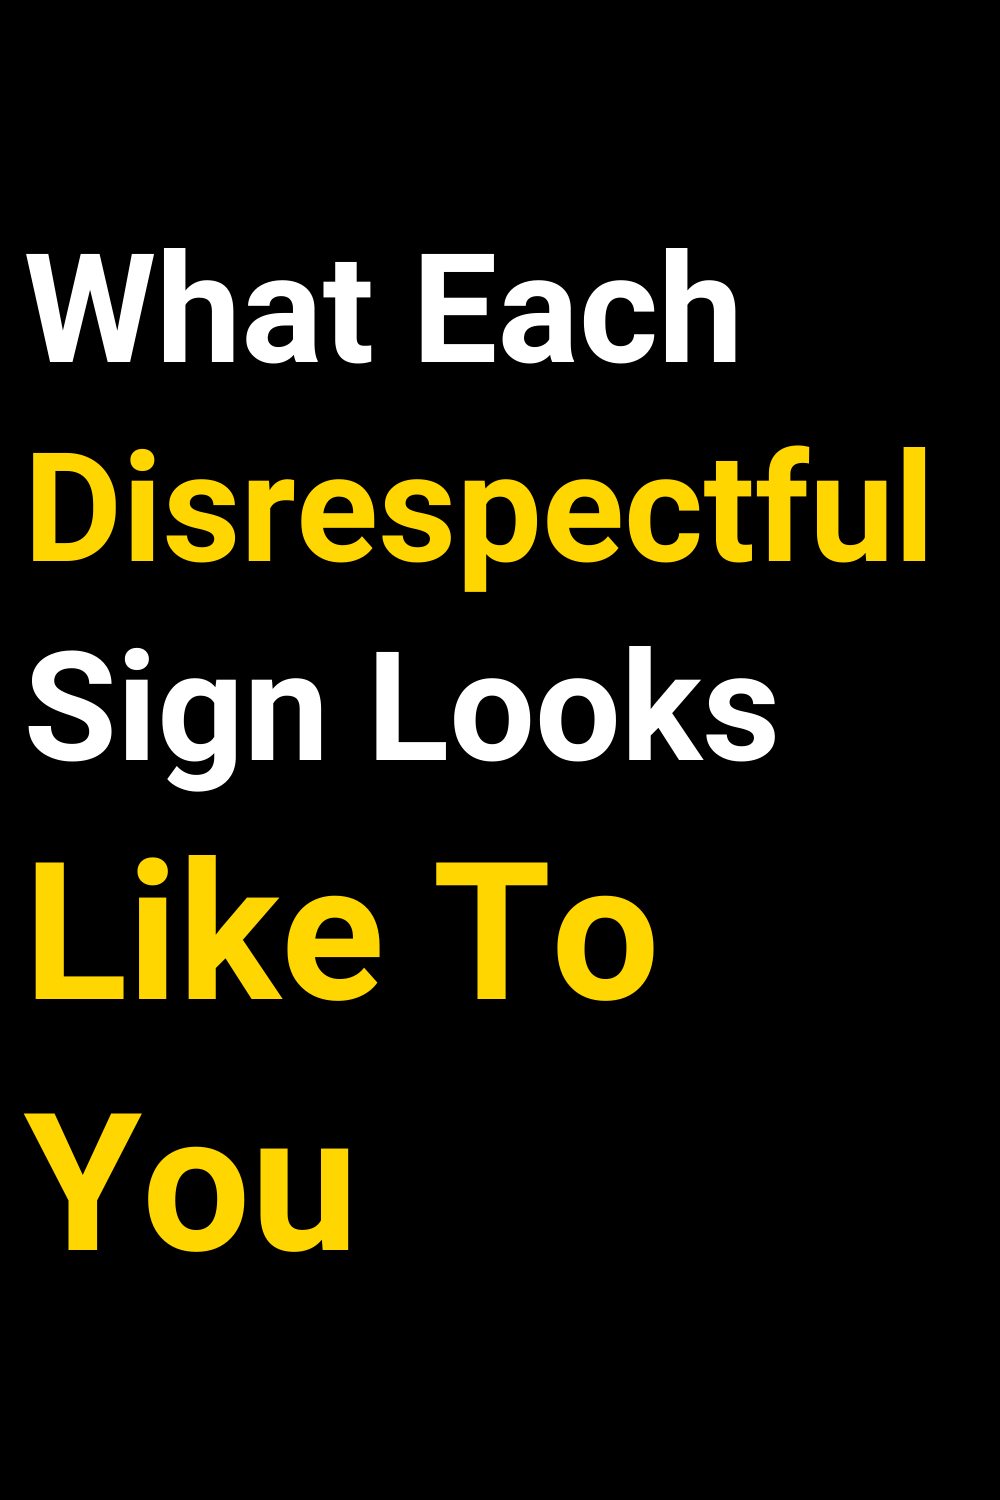 What Each Disrespectful Sign Looks Like To You